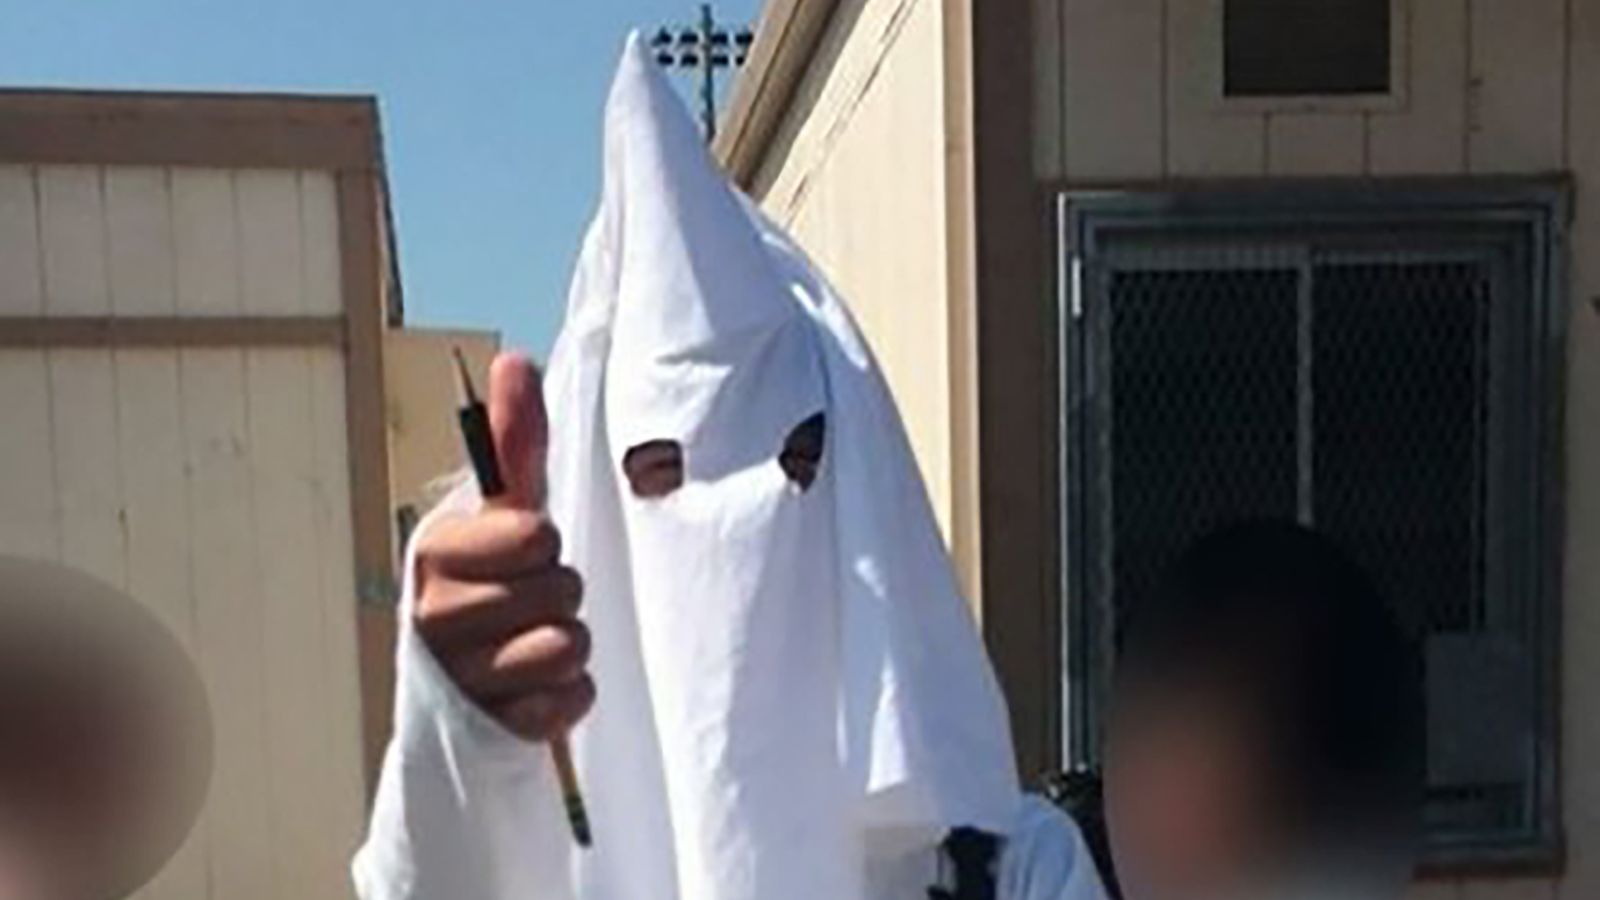 California student wears KKK costume to school for project